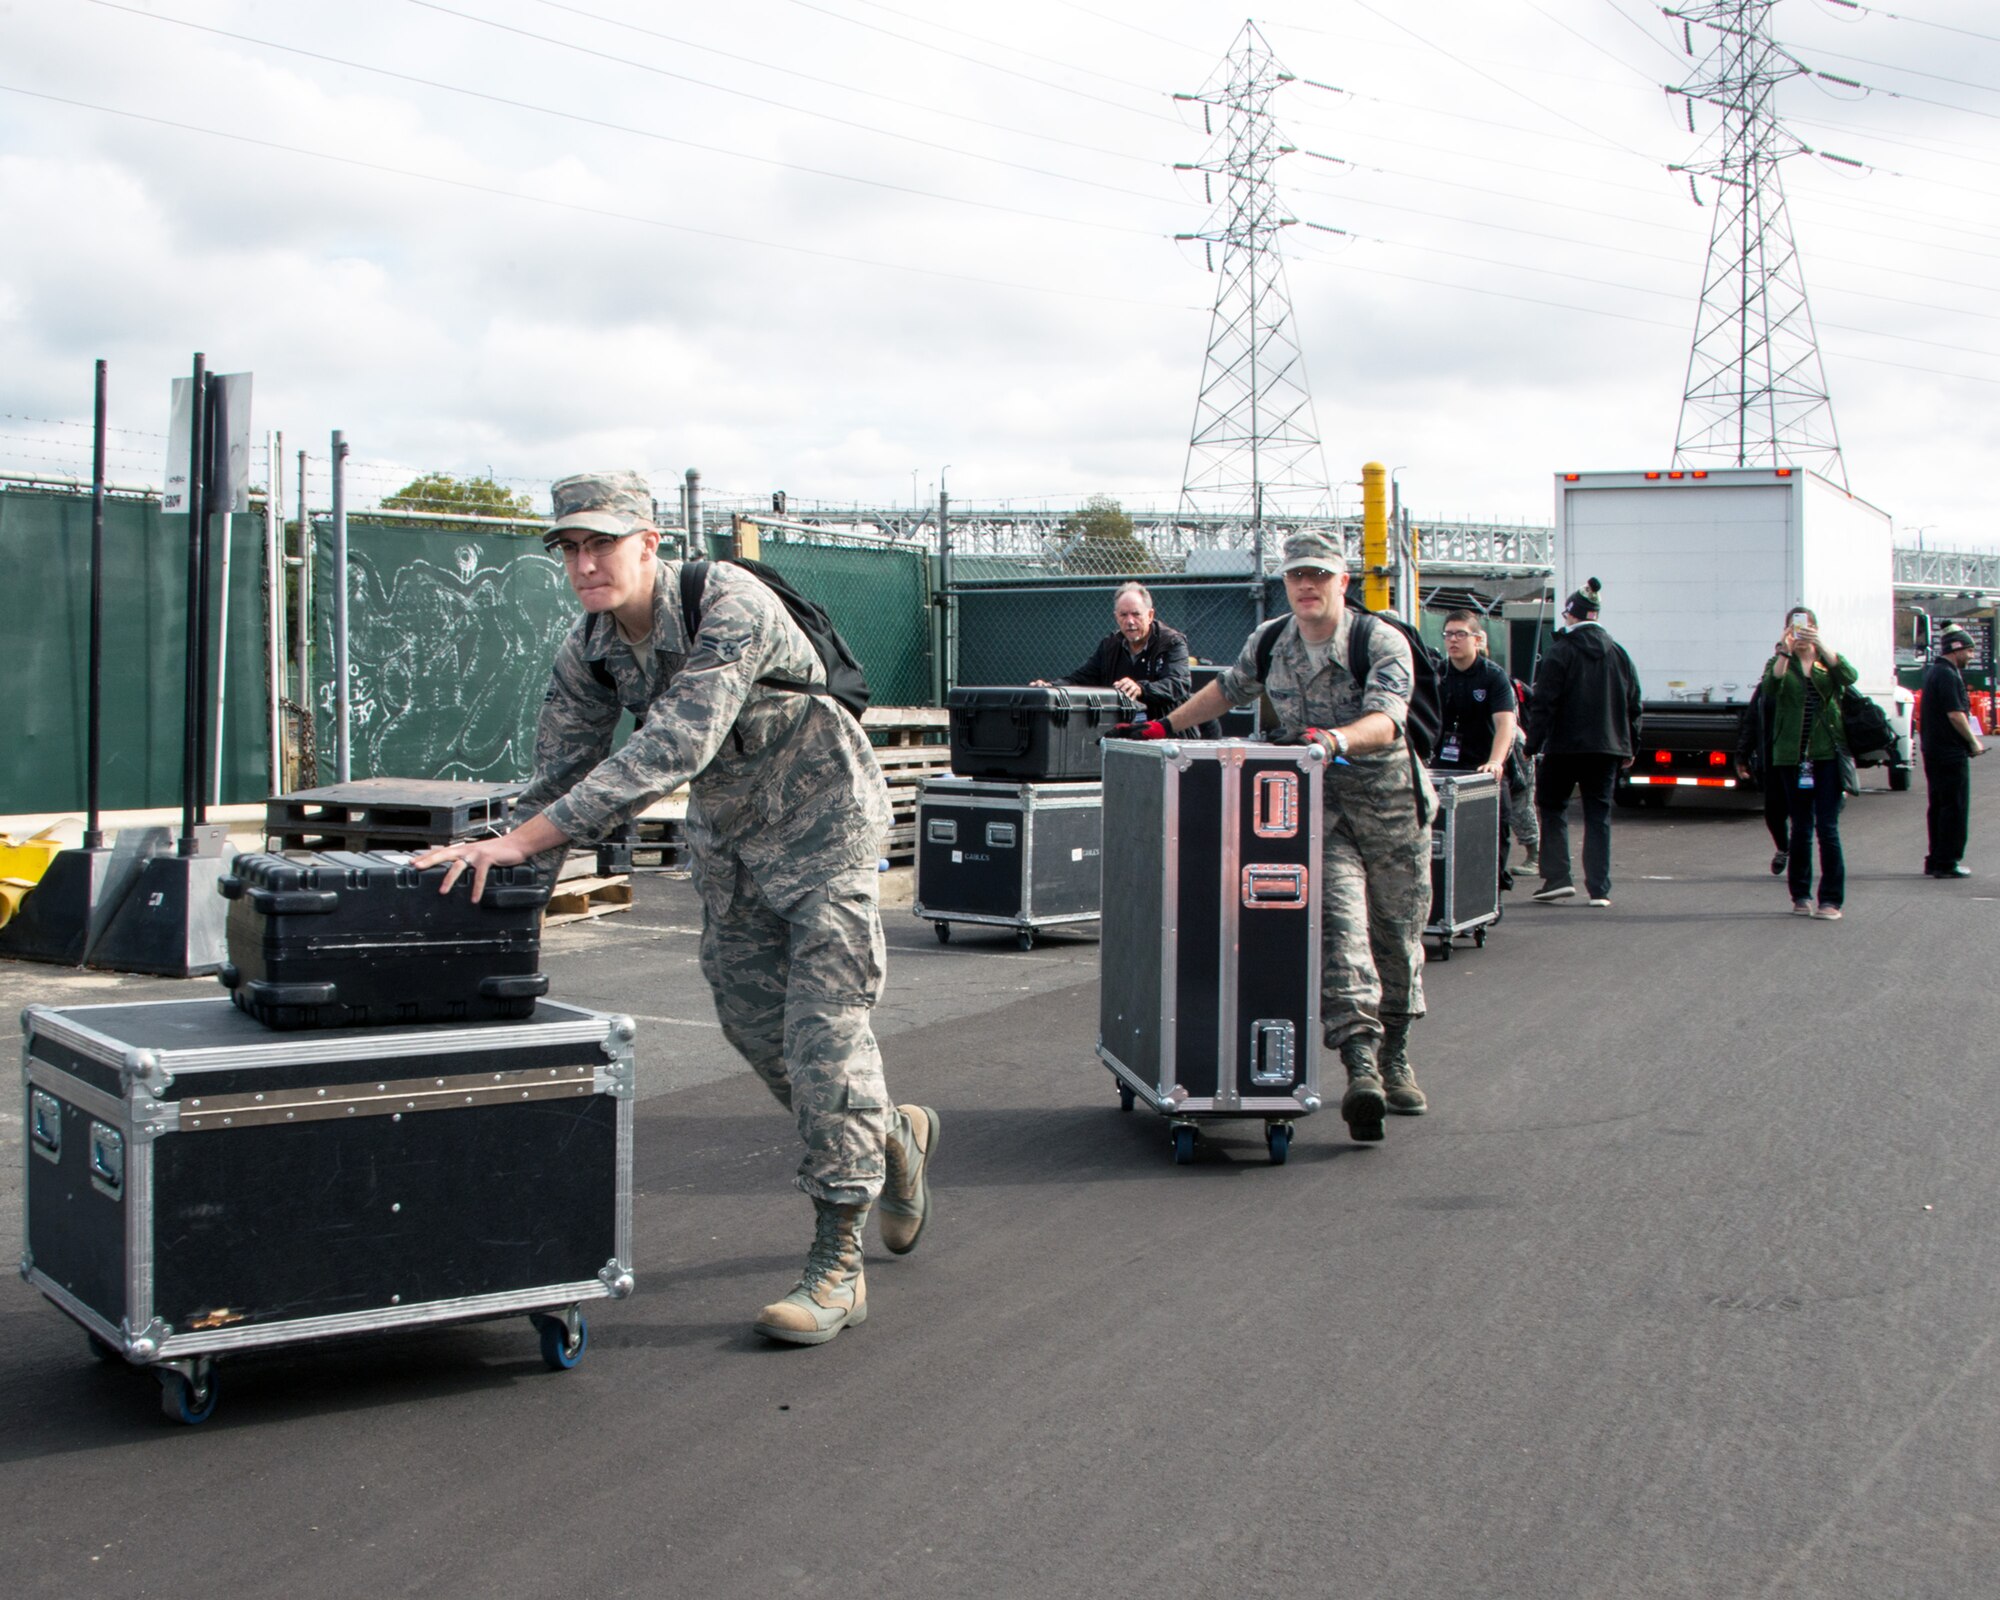 Members of the Air Force Band of the Golden West rock group “Mobility” unload equipment for their halftime show performance at the Oakland Raiders Salute to Service game against the Denver Broncos at the Oakland Coliseum in Oakland Calif., Nov 6, 2016. The band is stationed at Travis Air Force Base, Calif., and performed to a live audience of more than 54,000 fans. The band’s performing groups advance Air Mobility Command and global Air Force missions by providing professional musical products and services for official military, recruiting and community relations events. (U.S. Air Force photo/Louis Briscese)